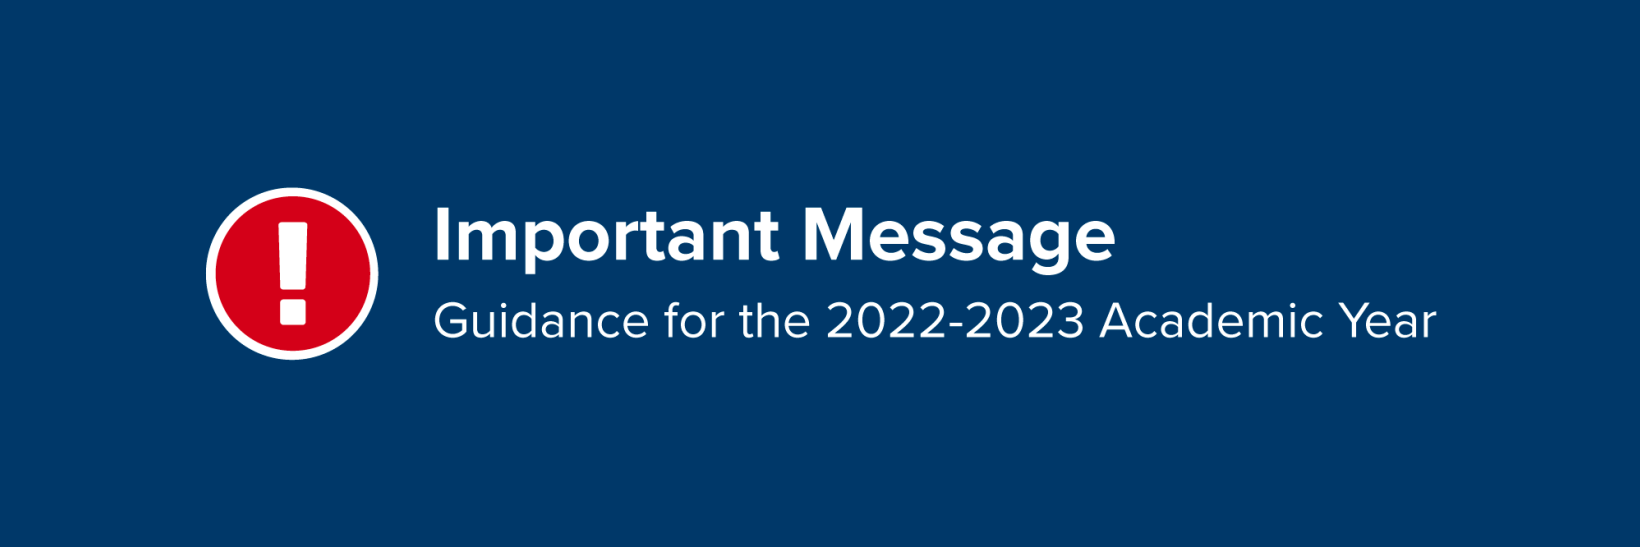 Important Message: Guidance for the 2022-2023 Academic Year